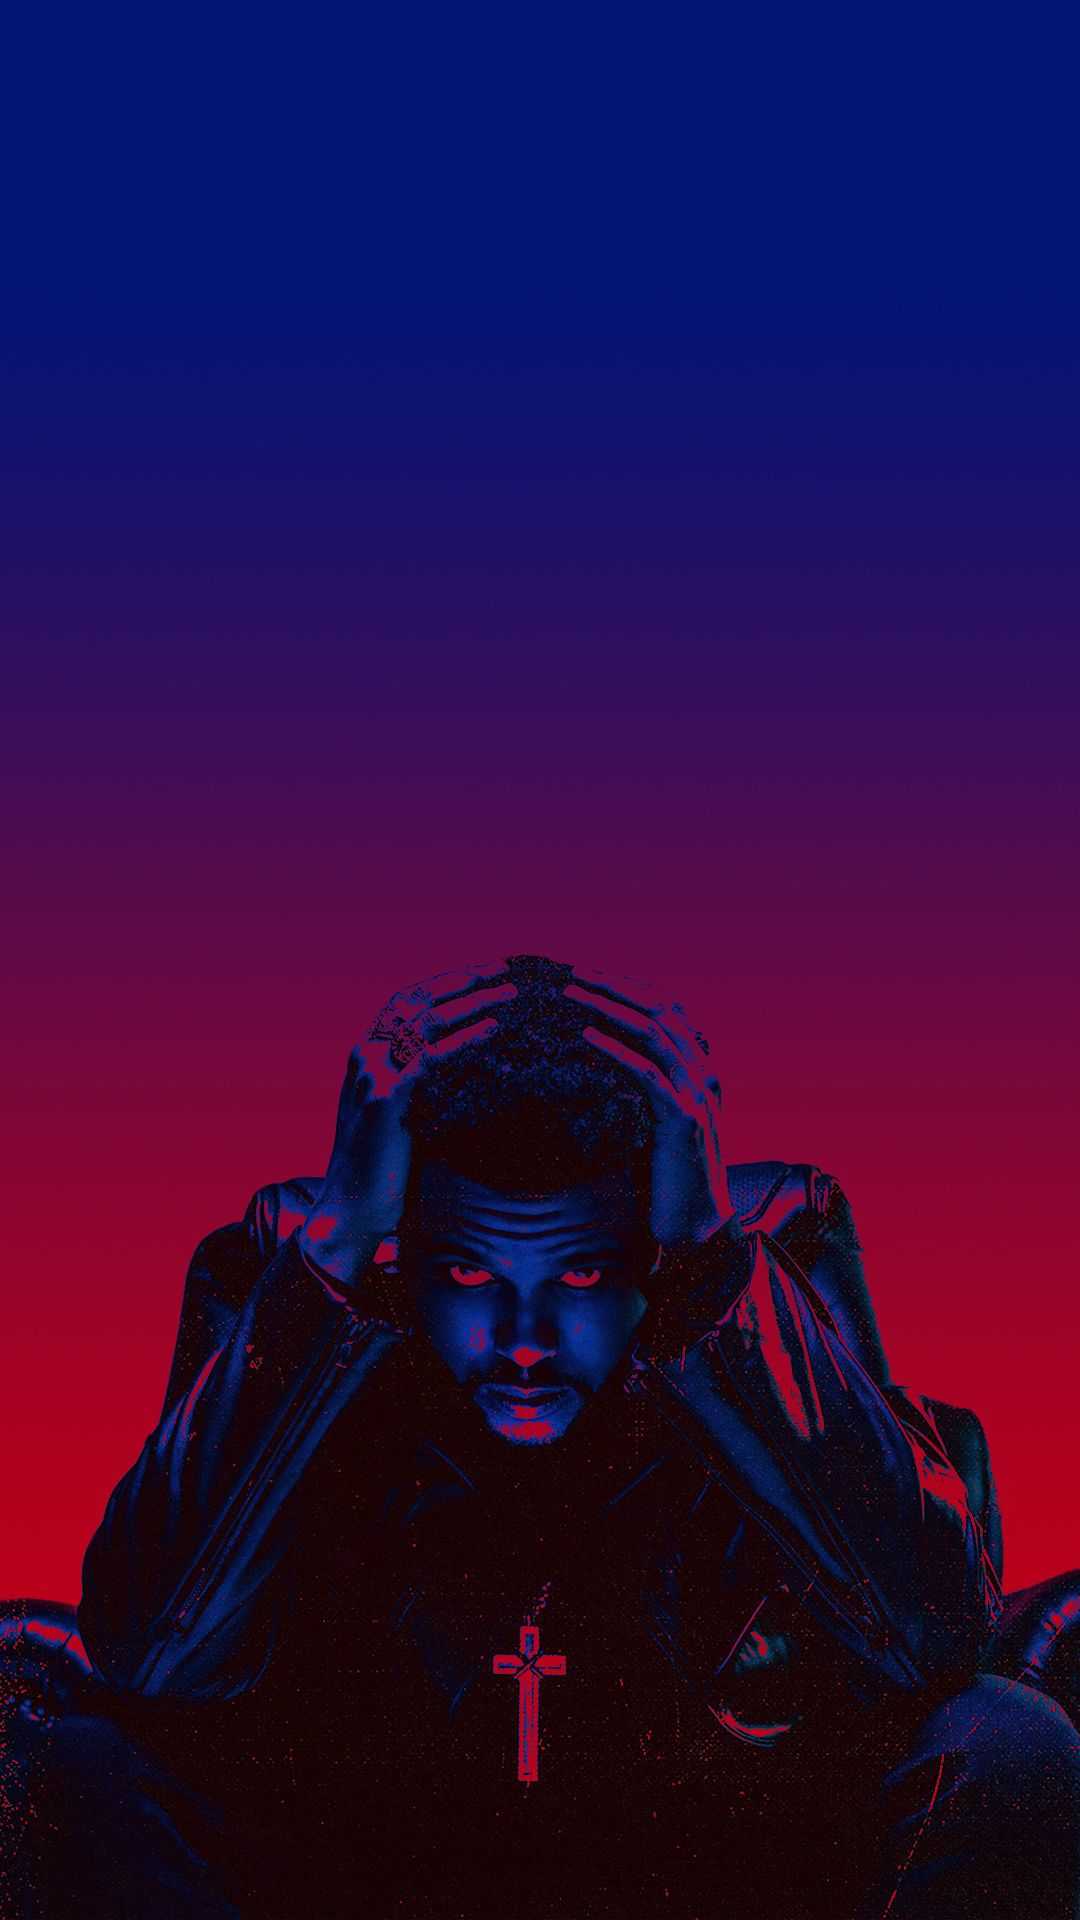 The Weeknd wallpapers  The weeknd wallpaper iphone The weeknd poster The  weeknd background